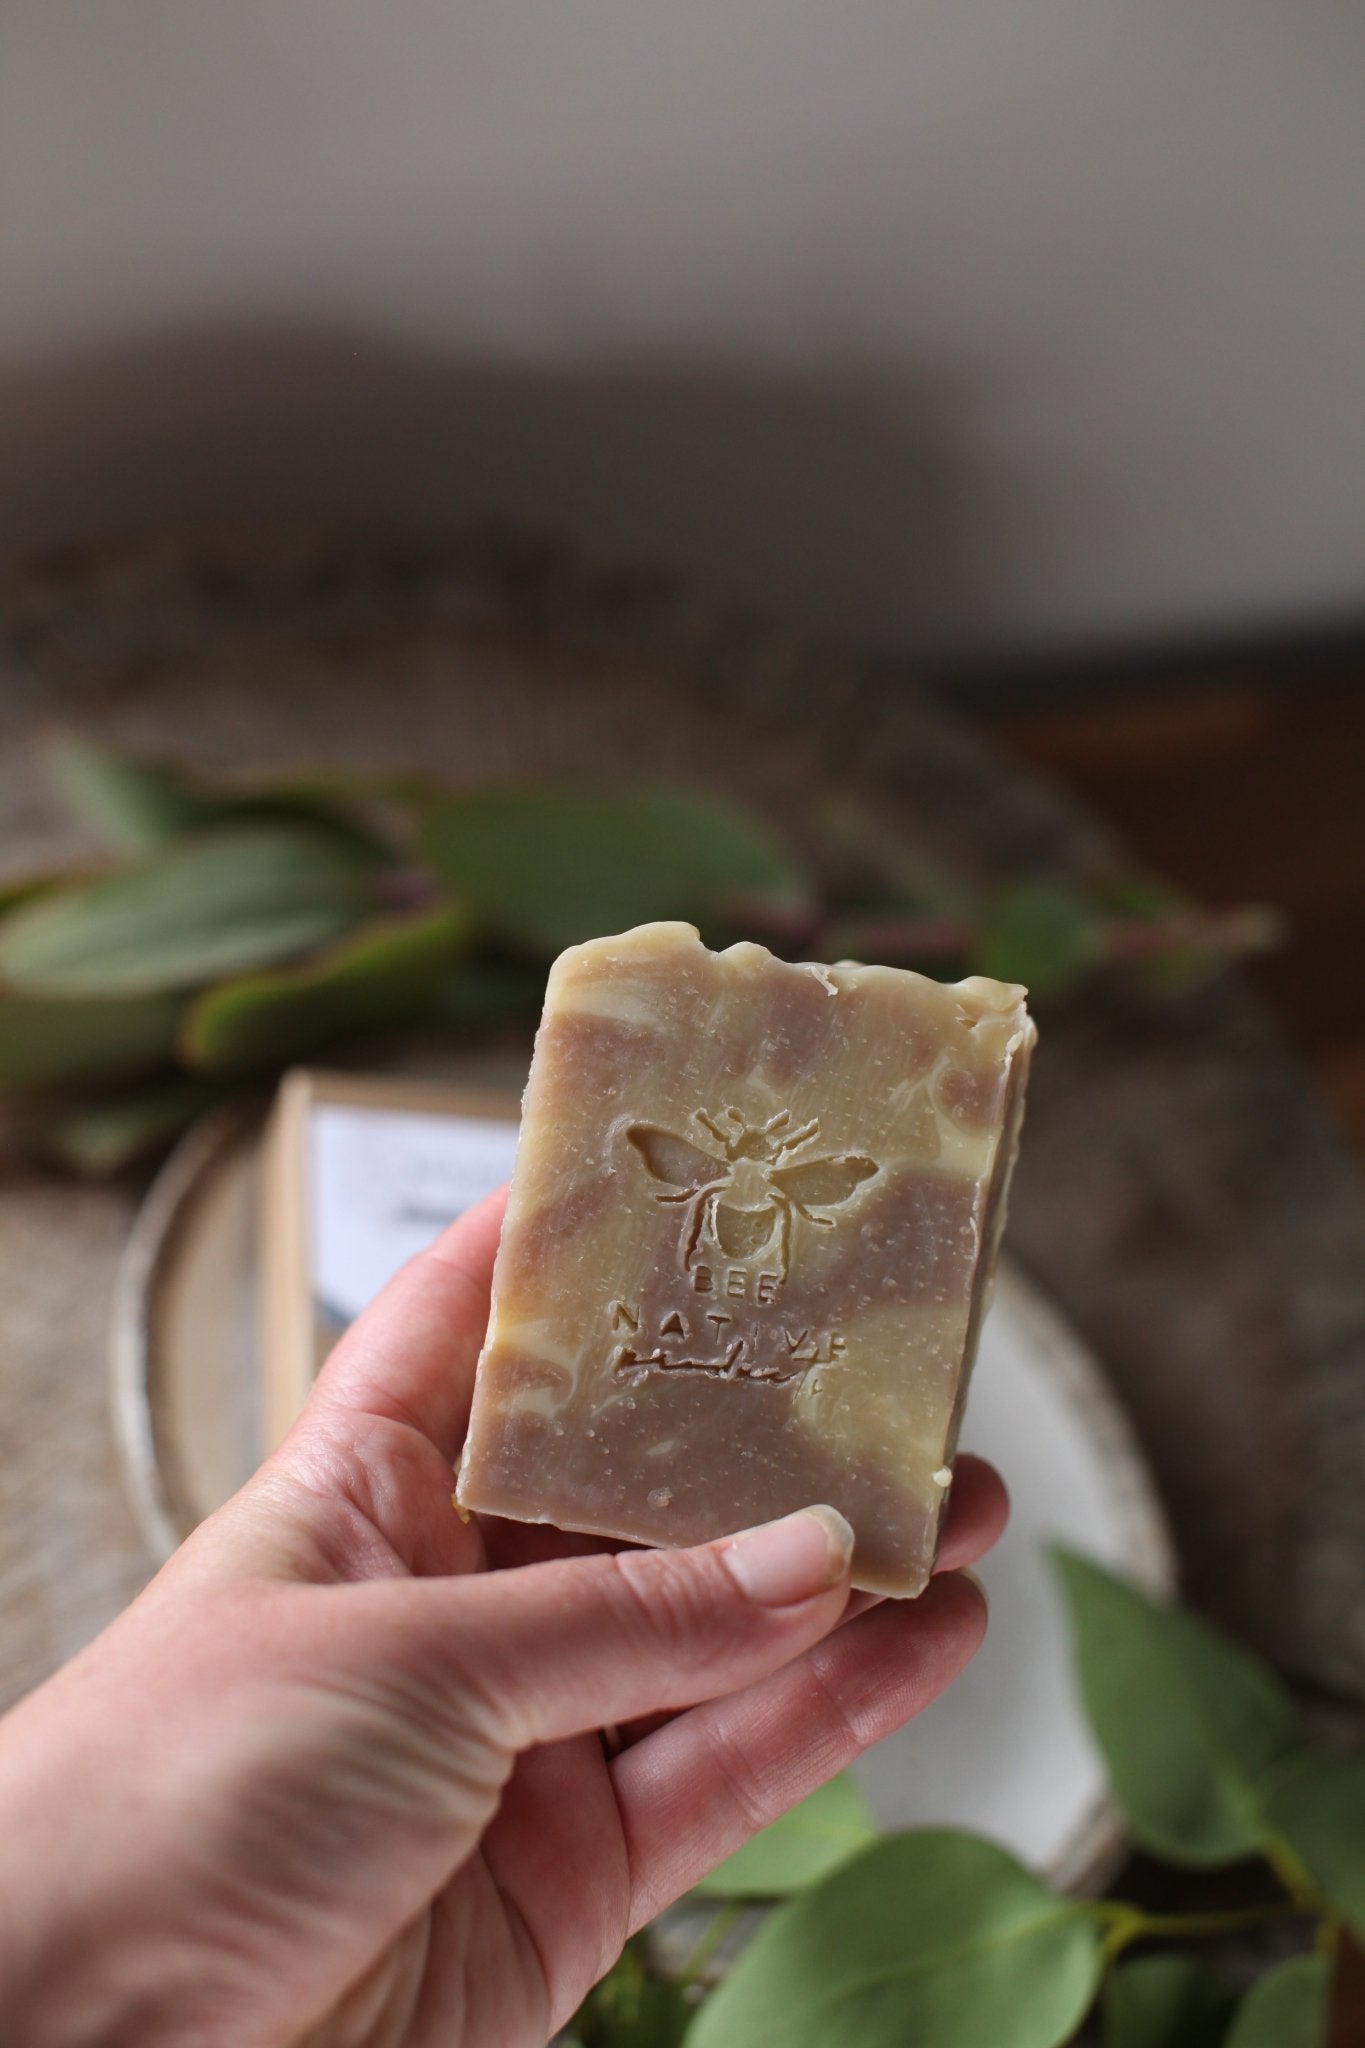 Peppermint Wildflower Natural Soap - Bee native products